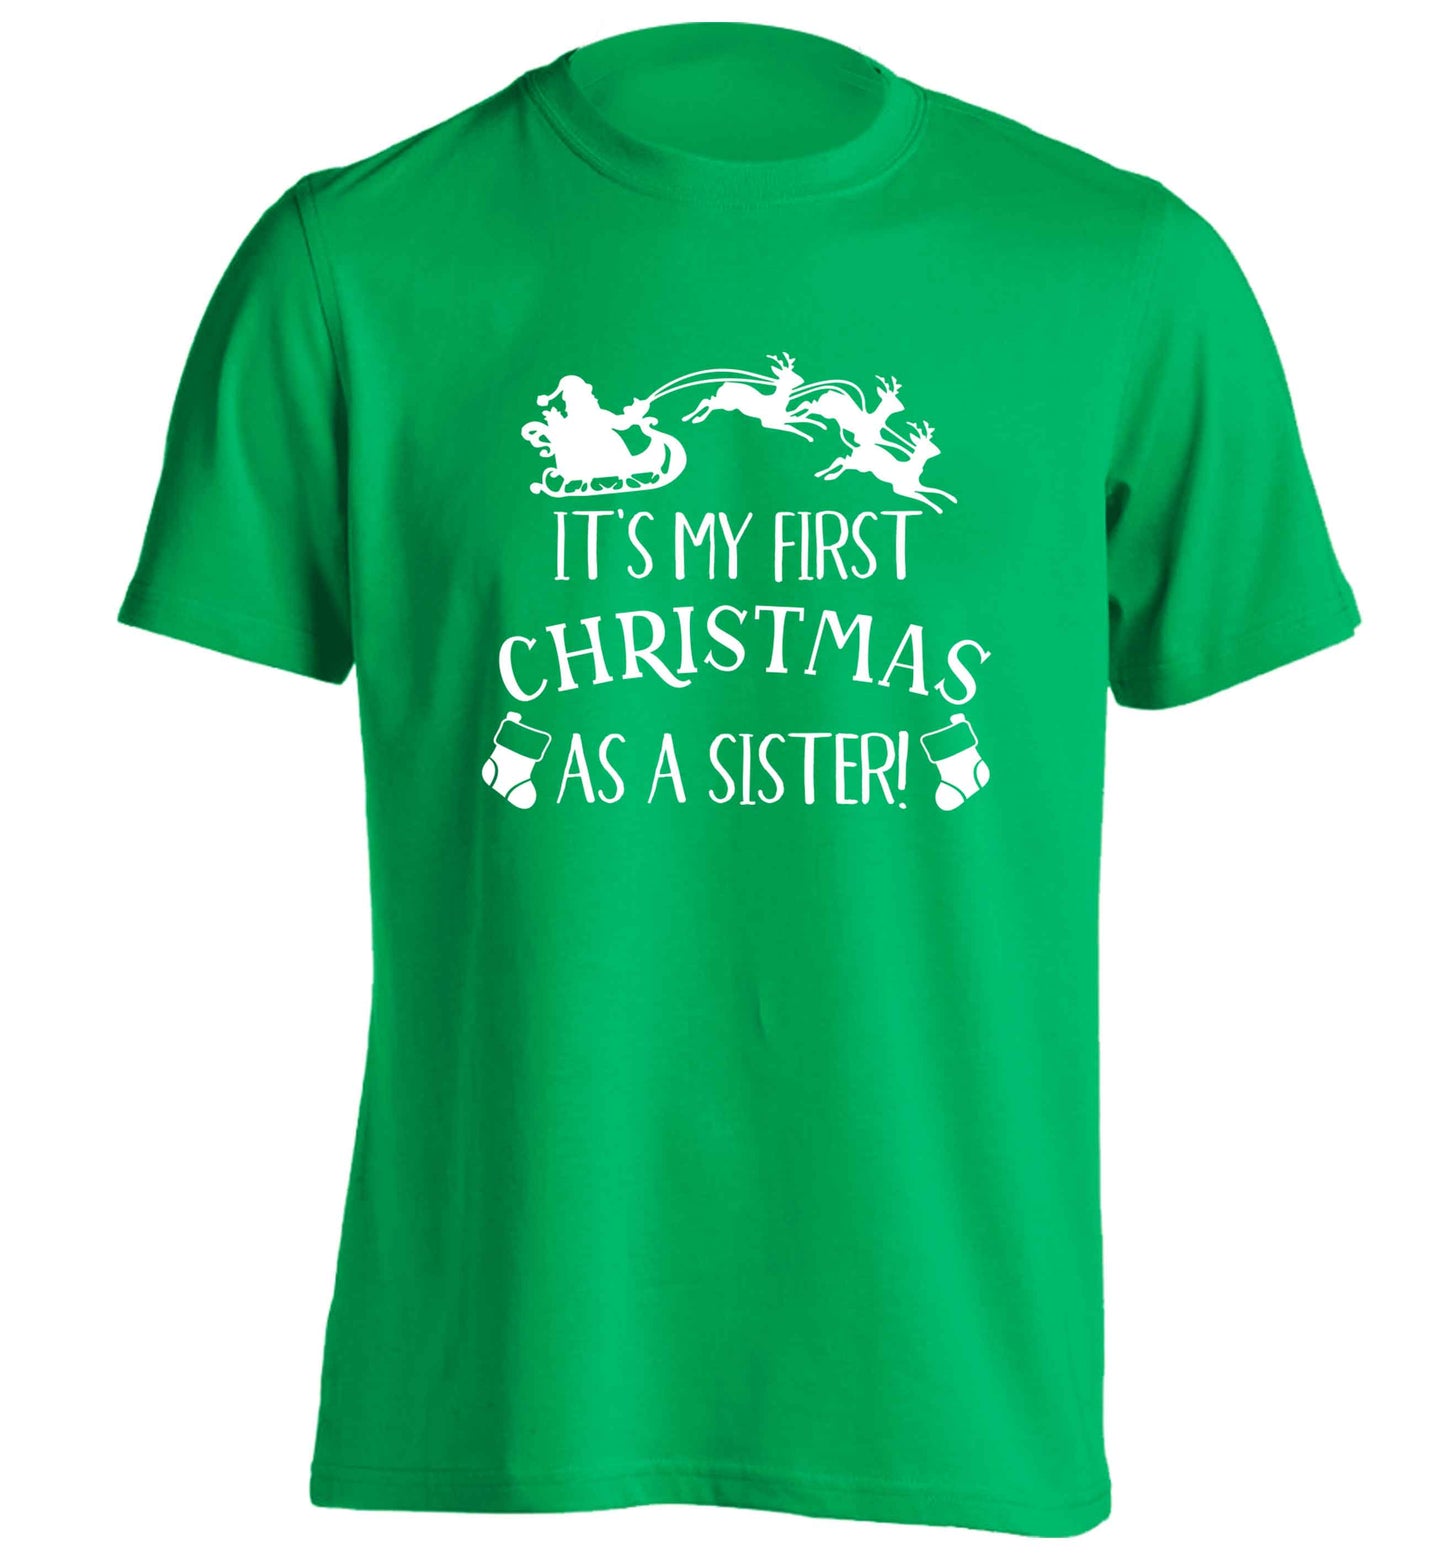 It's my first Christmas as a sister! adults unisex green Tshirt 2XL